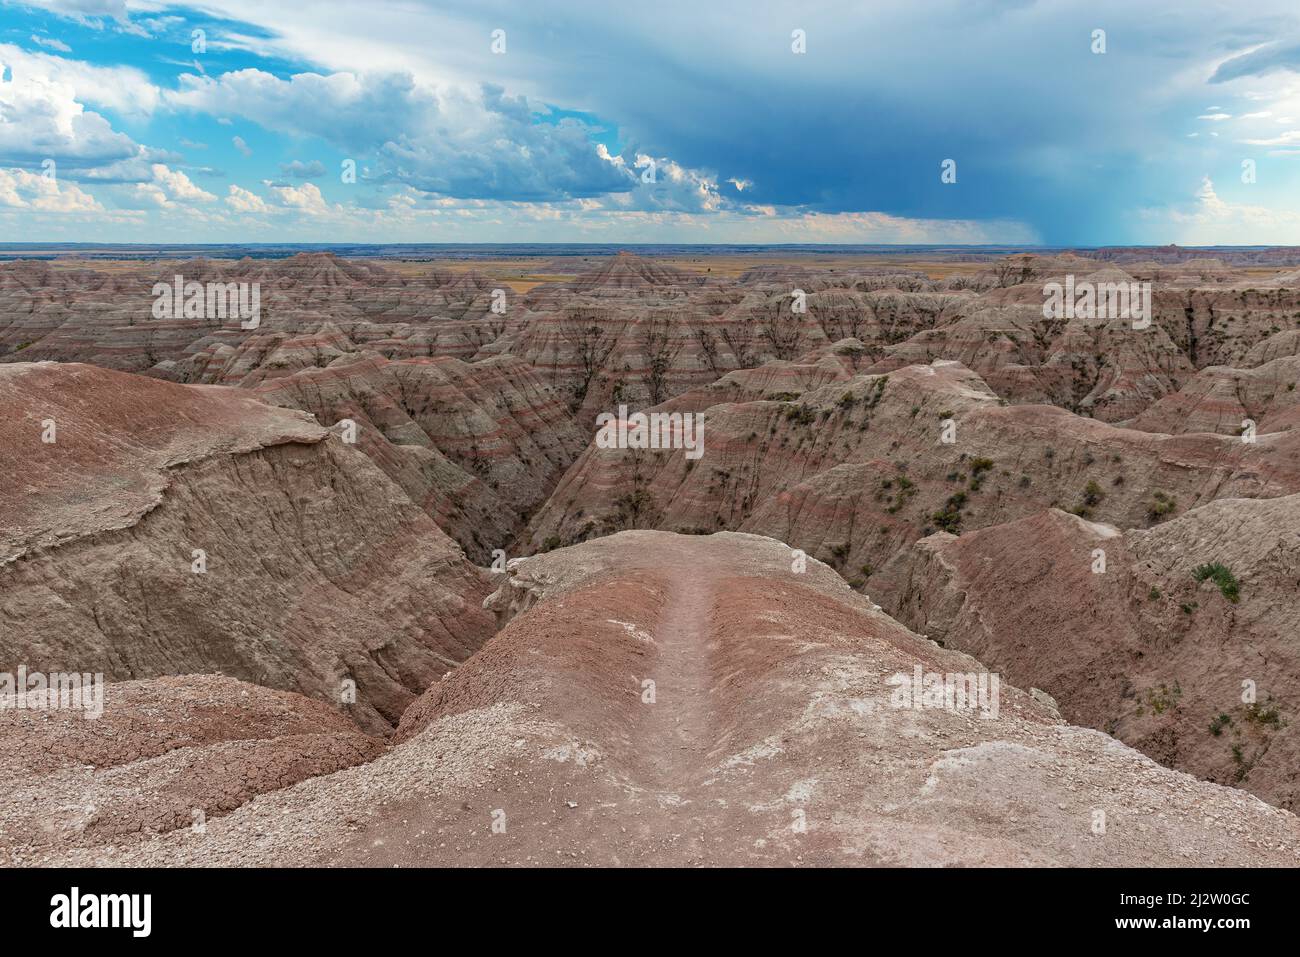 Viewpoint upon the geological layers of Badlands national park during a thunderstorm, South Dakota, USA. Stock Photo